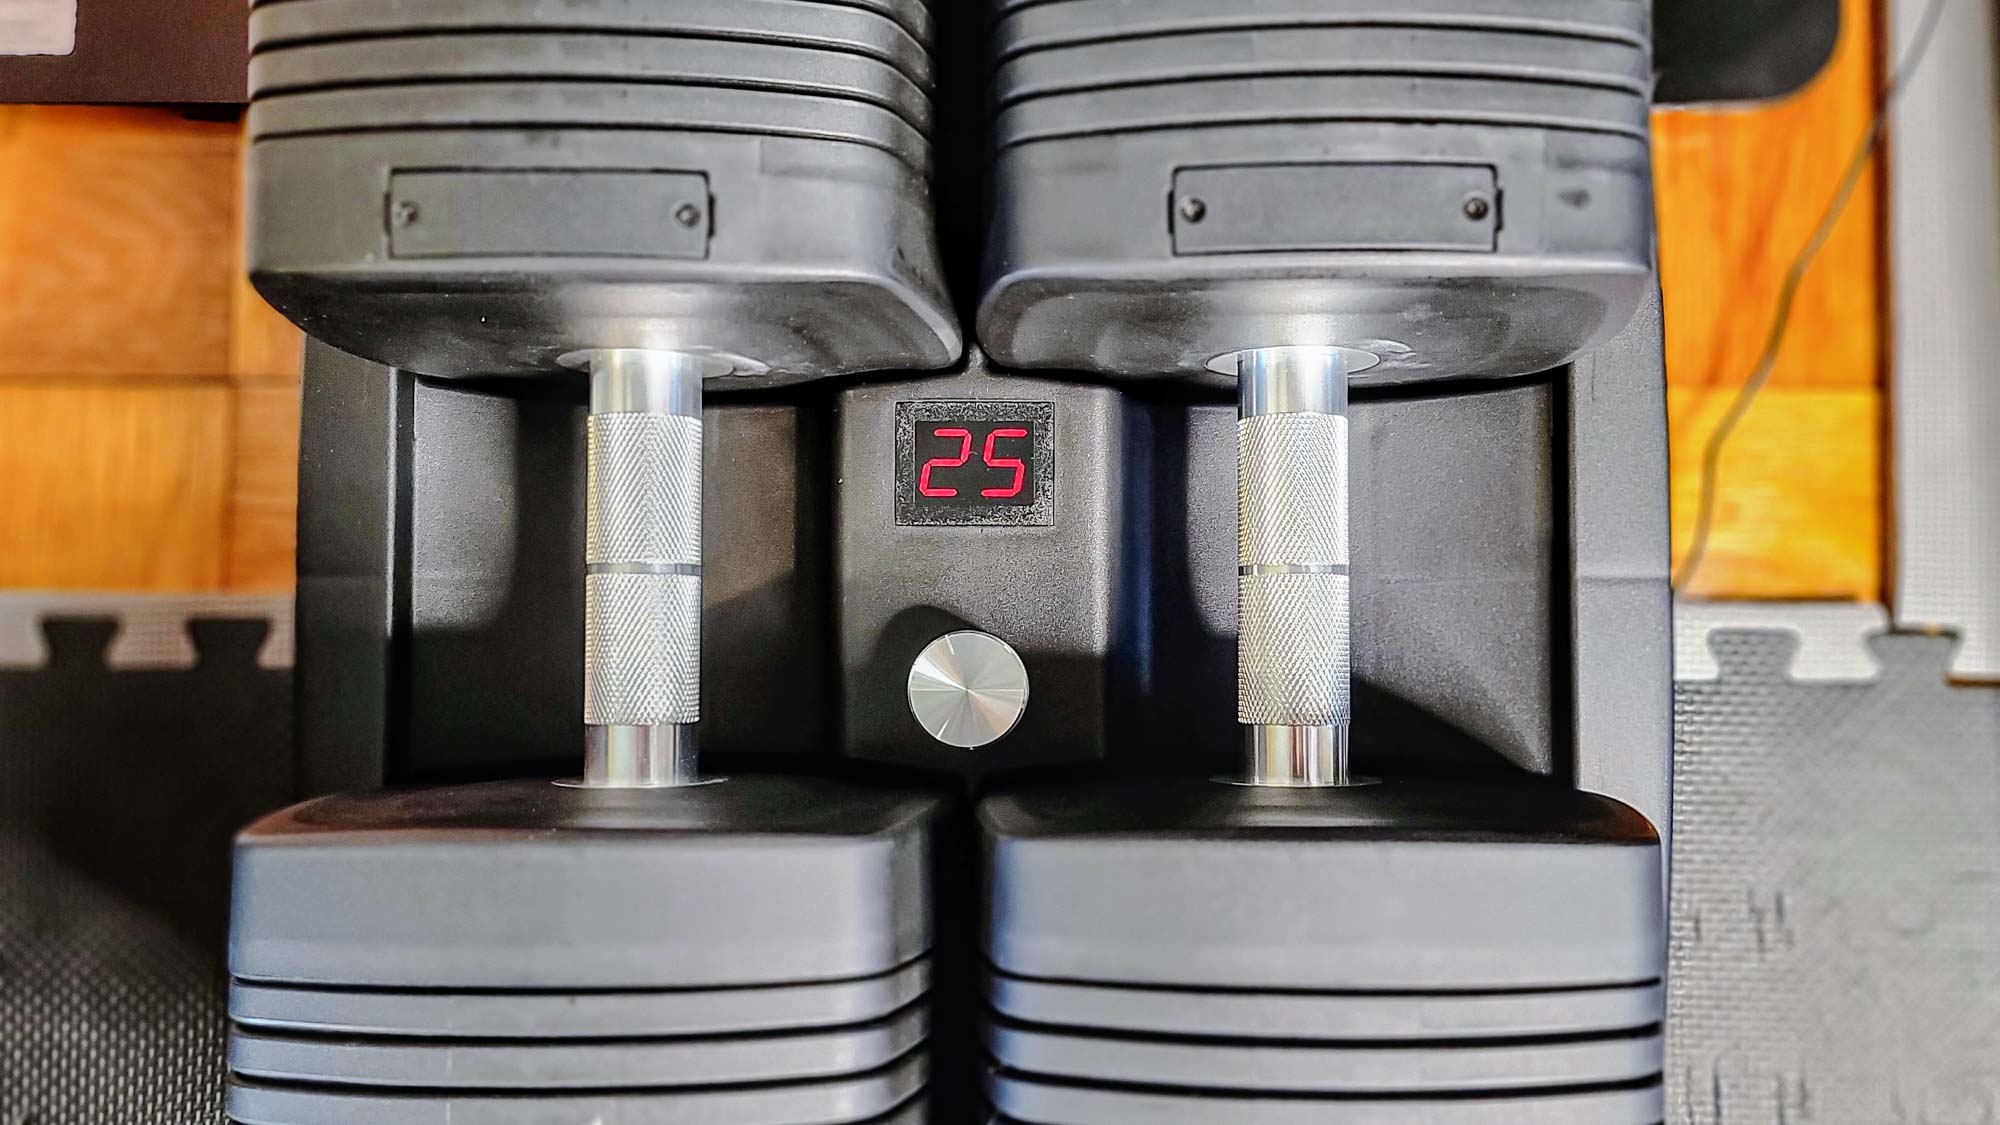 NordicTrack iSelect Voice-Controlled Dumbbells in stand